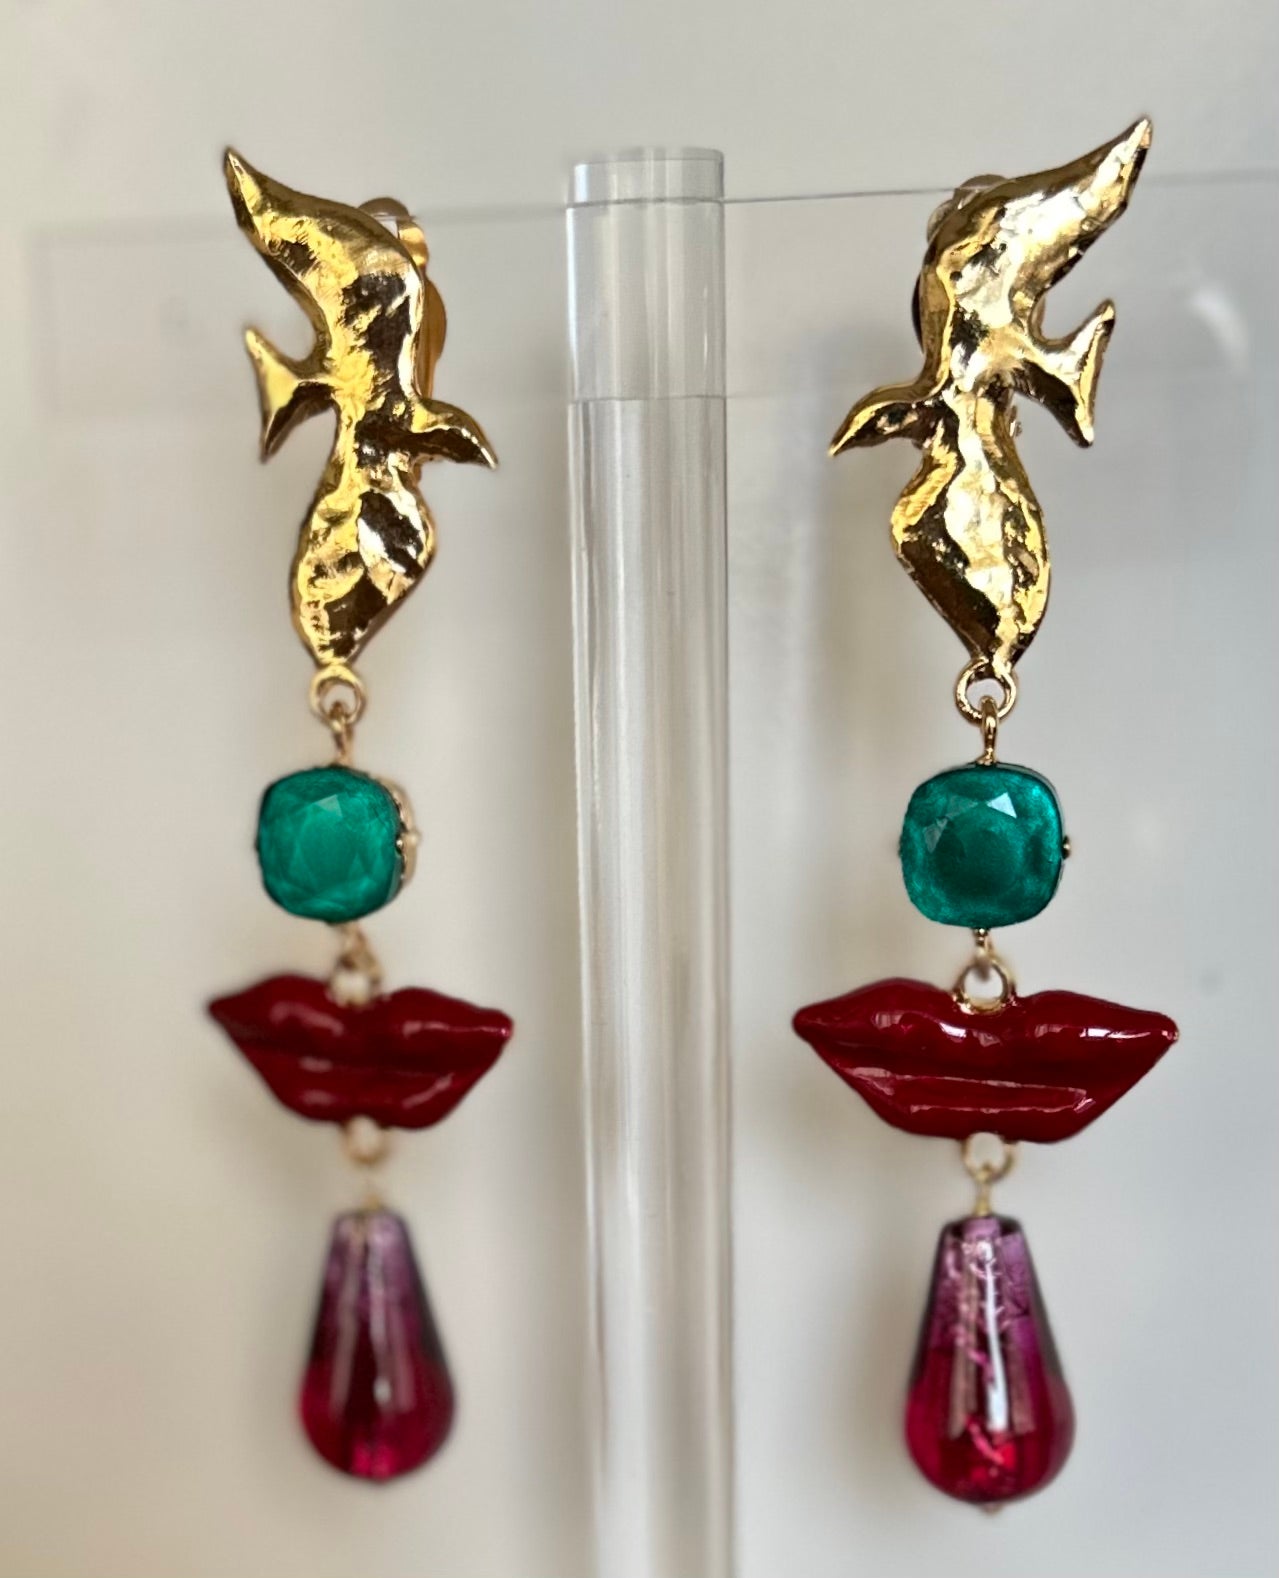 Dali collection:
A nod to the master of surrealism and his elegant mustaches. Melting shapes, birds in flight and lacquered mouths express the passion and creative madness of the Spanish artist.
Clip Earrings, very confortable on the ear.
Pate de